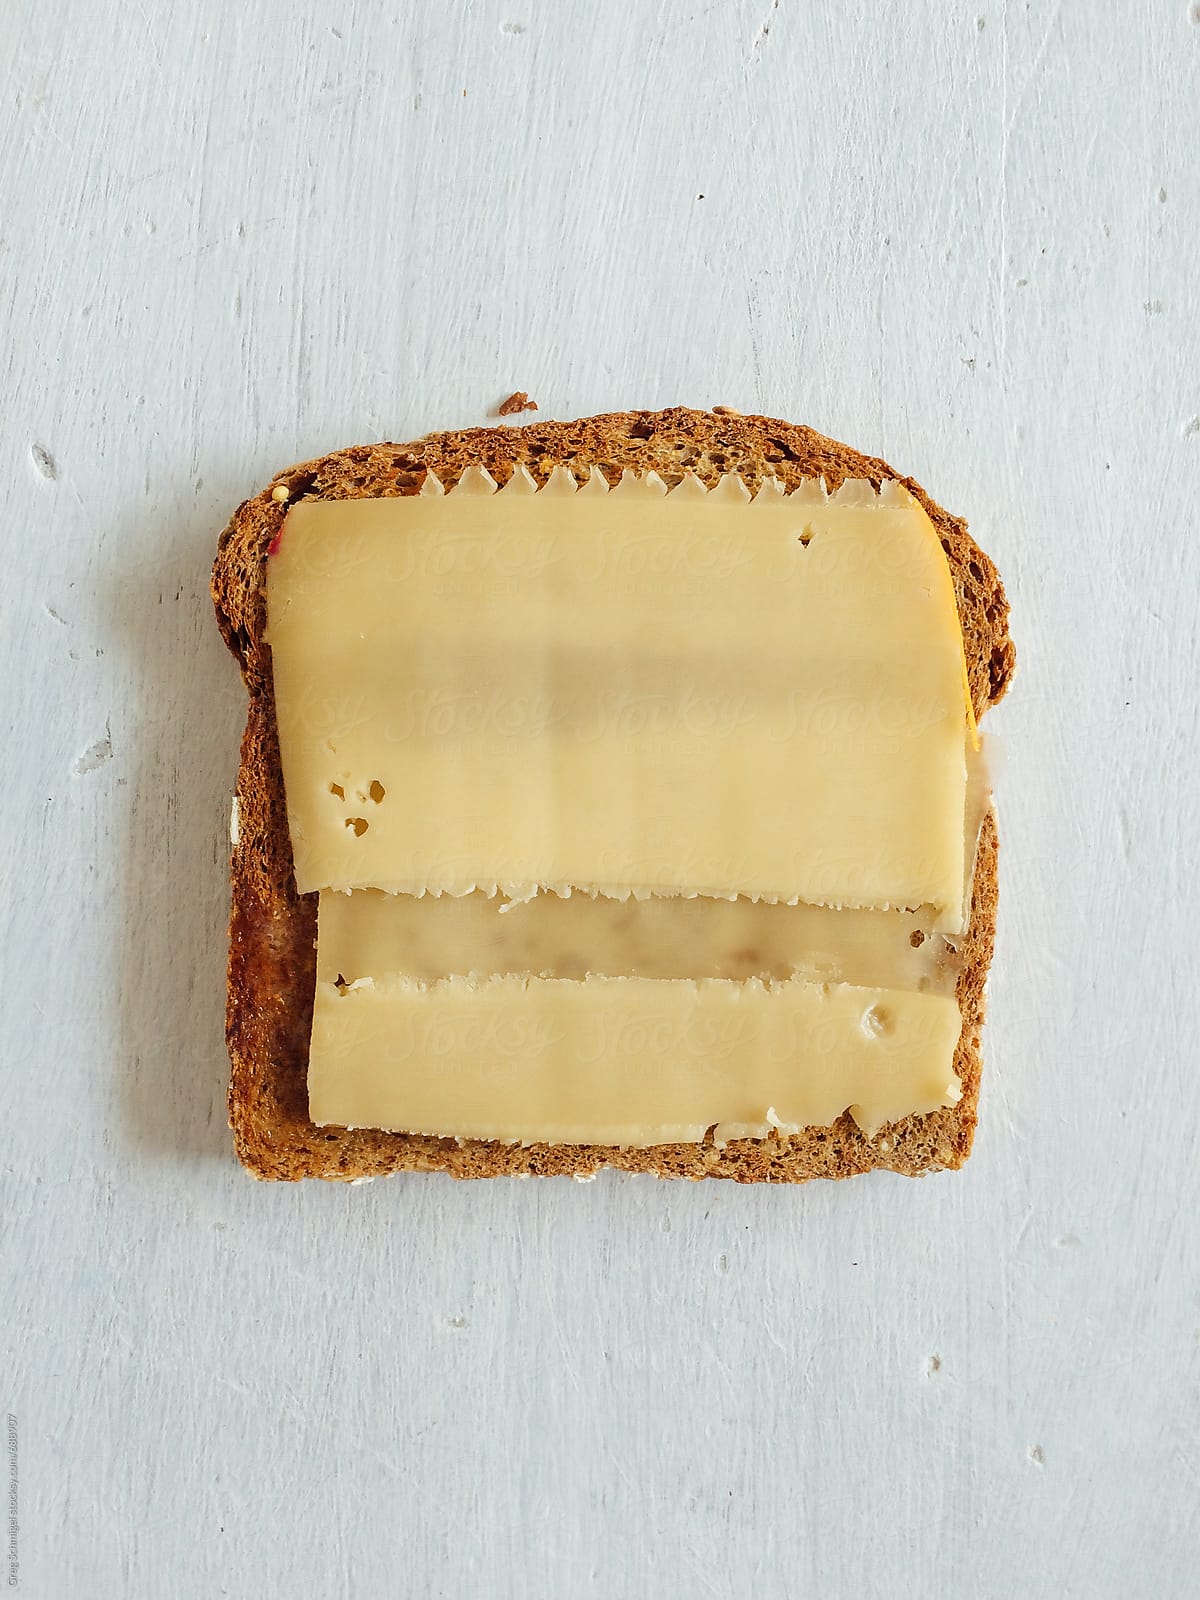 Easting toasted healthy breakfast bread with swiss cheese